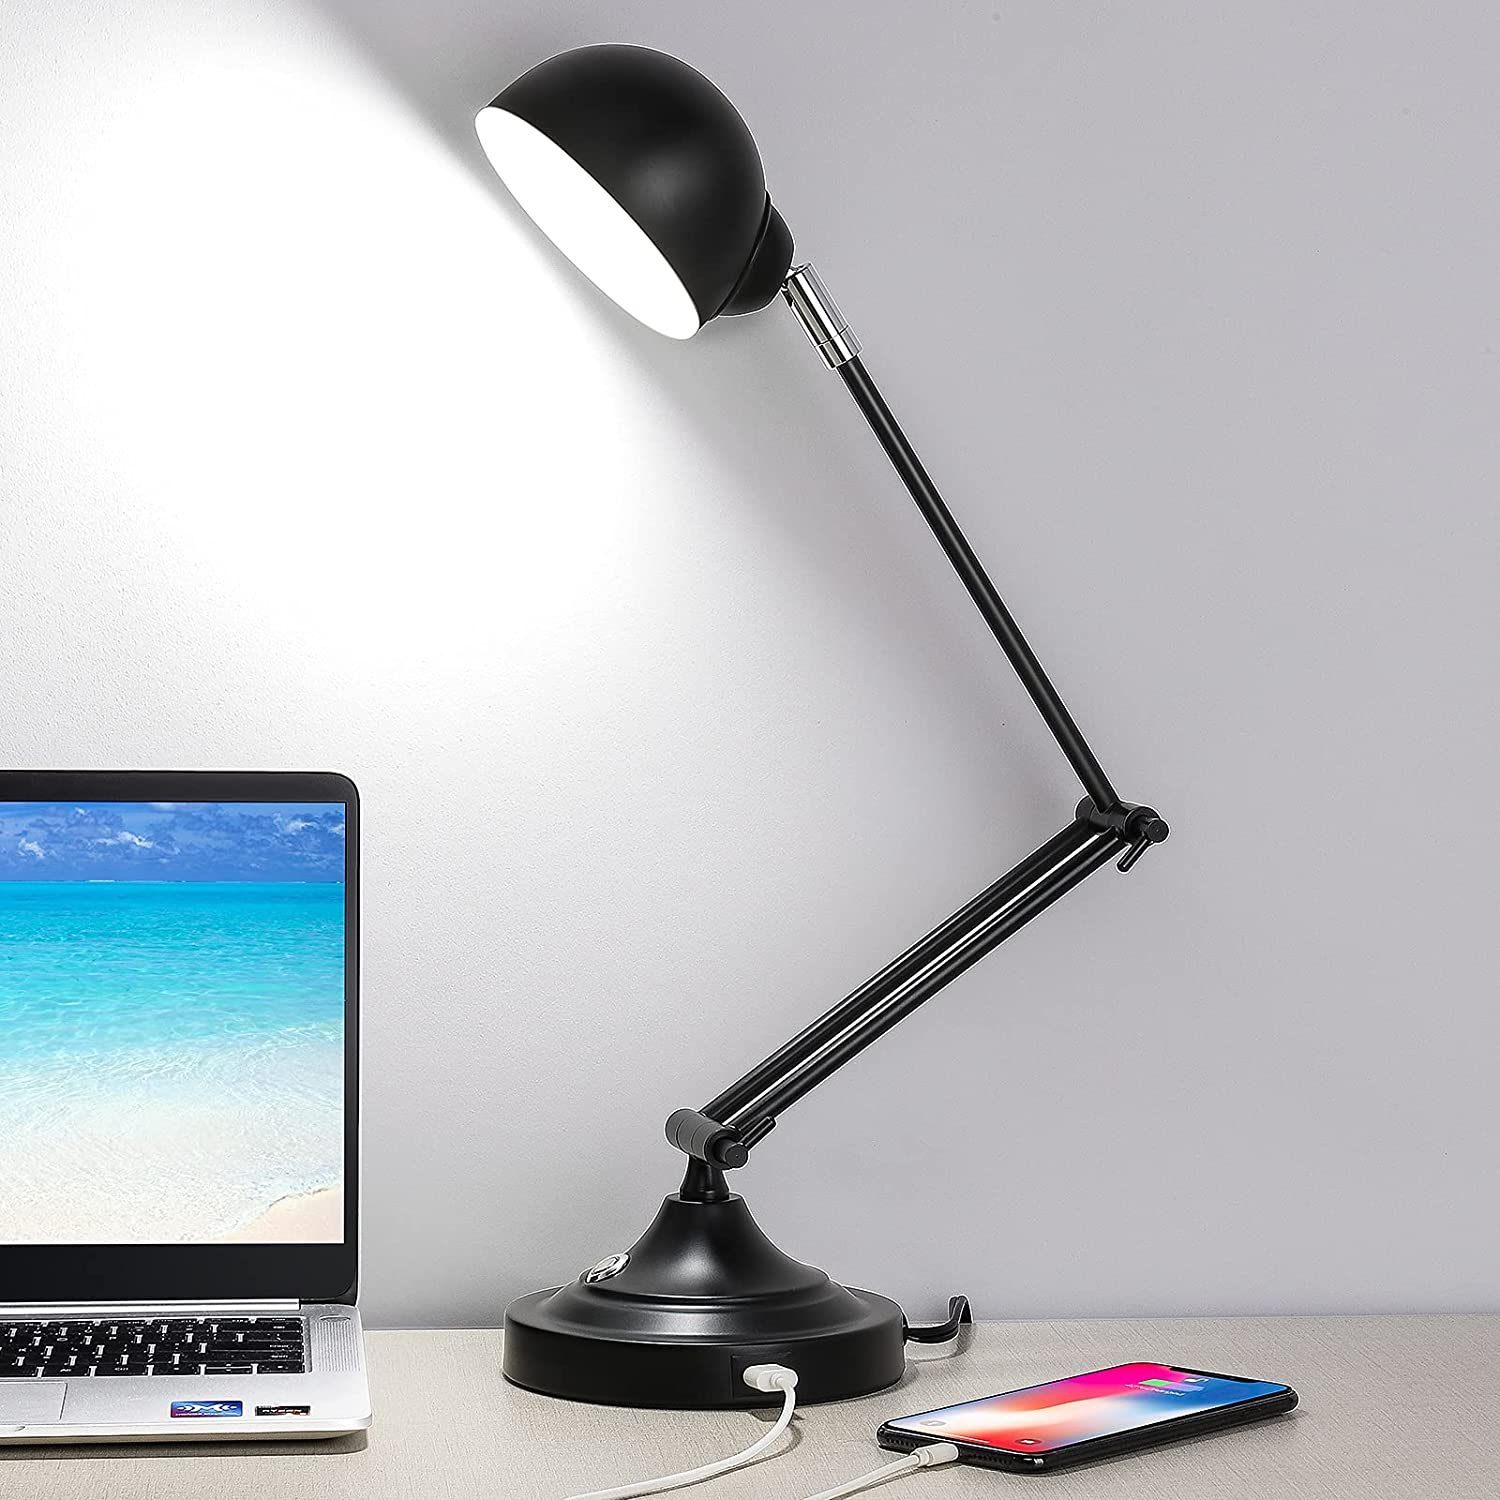 3-Color in 1 LED Desk Lamp with USB Charging Port $23.99